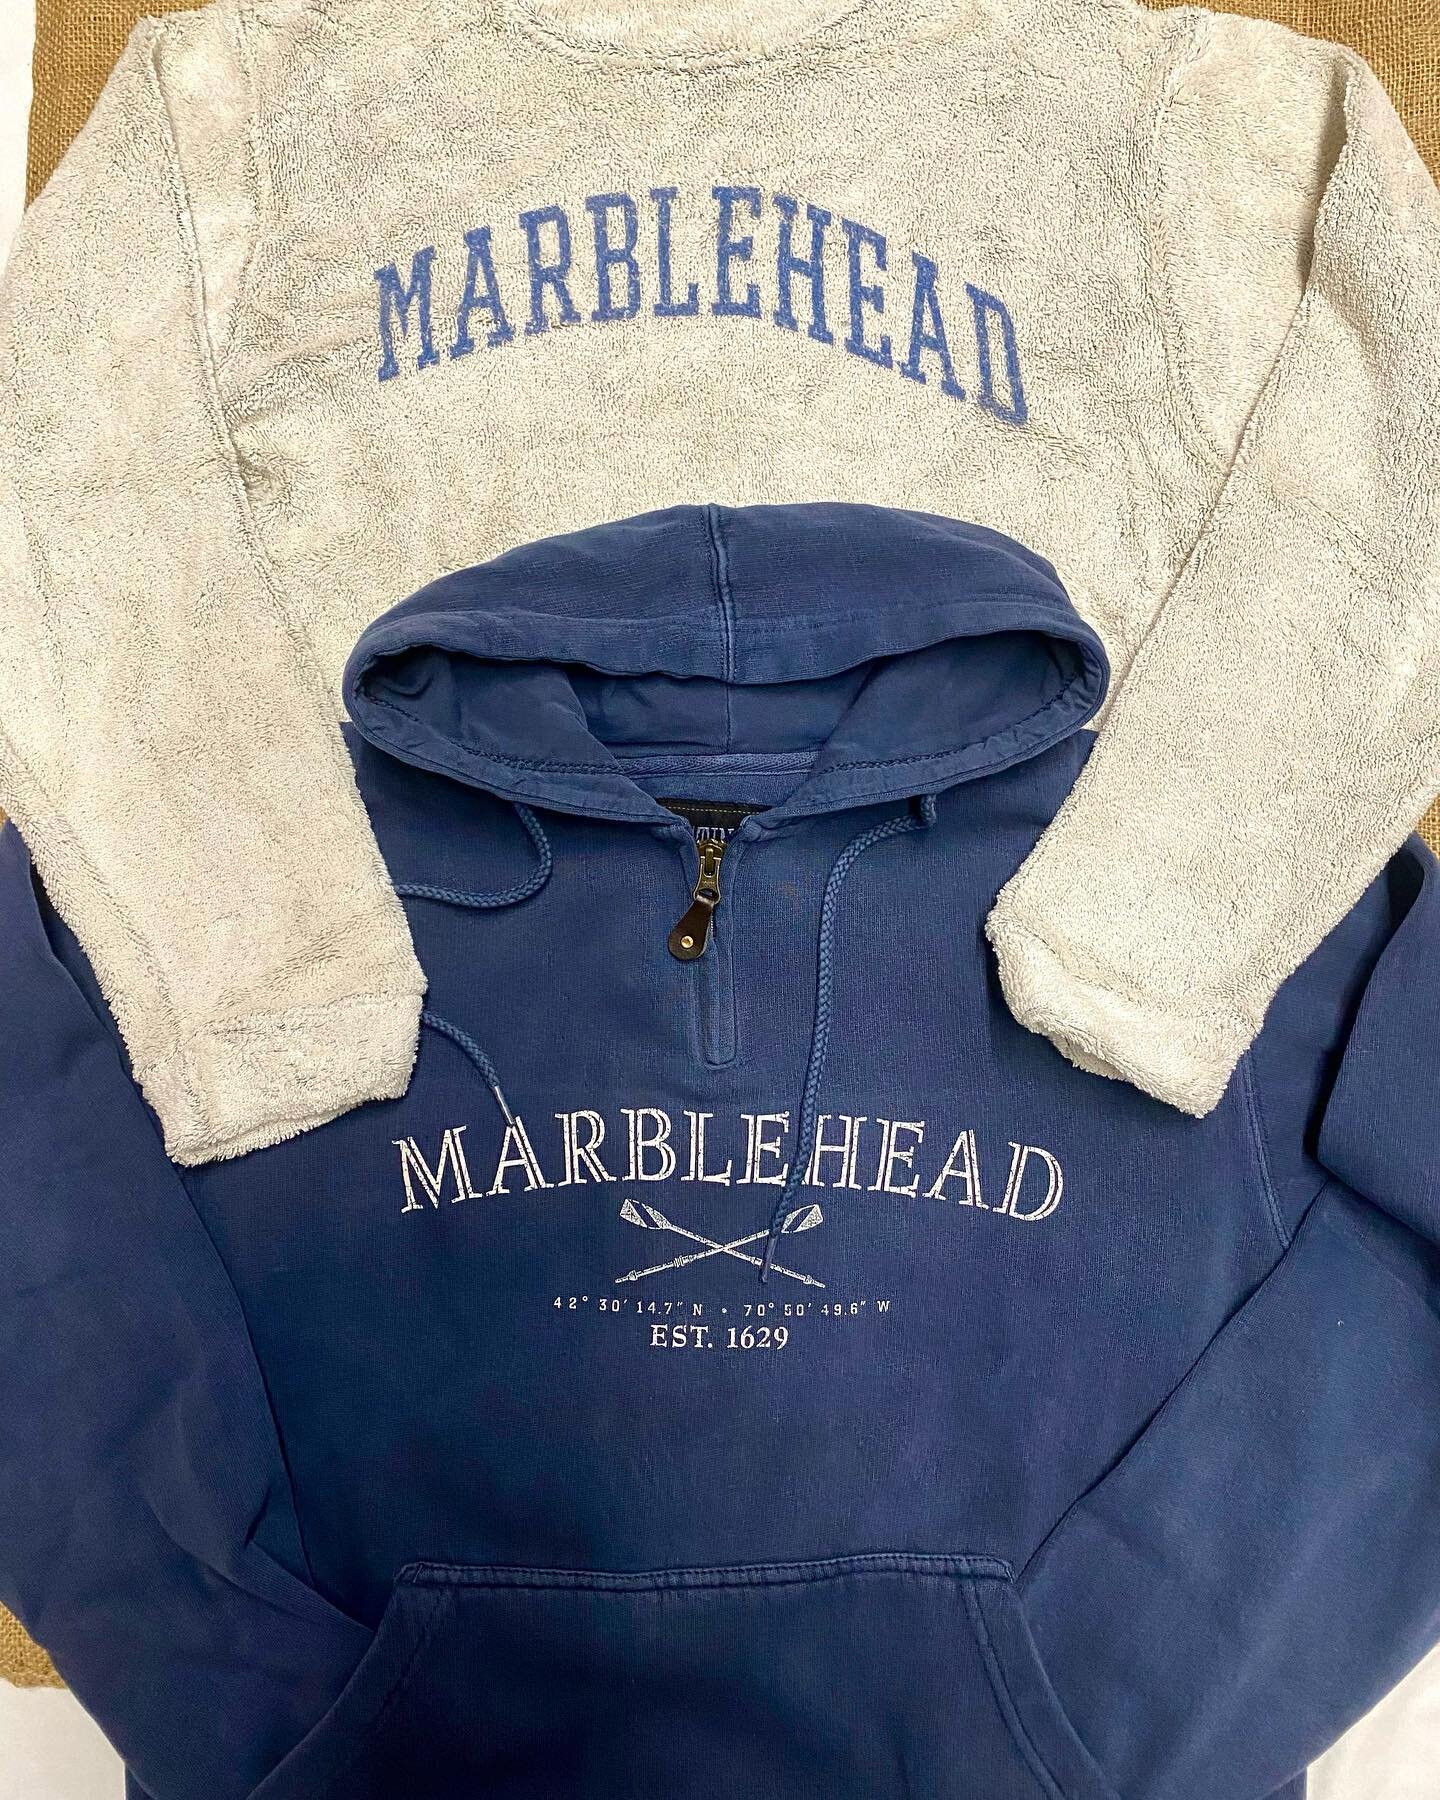 New! 🌸 Restock on our popular Terry Cloth and Mini Zip Hoodies just in time for spring!🌱New Comfort Wash Tees in long and short sleeve are uber soft⛵️#marbleheadproud